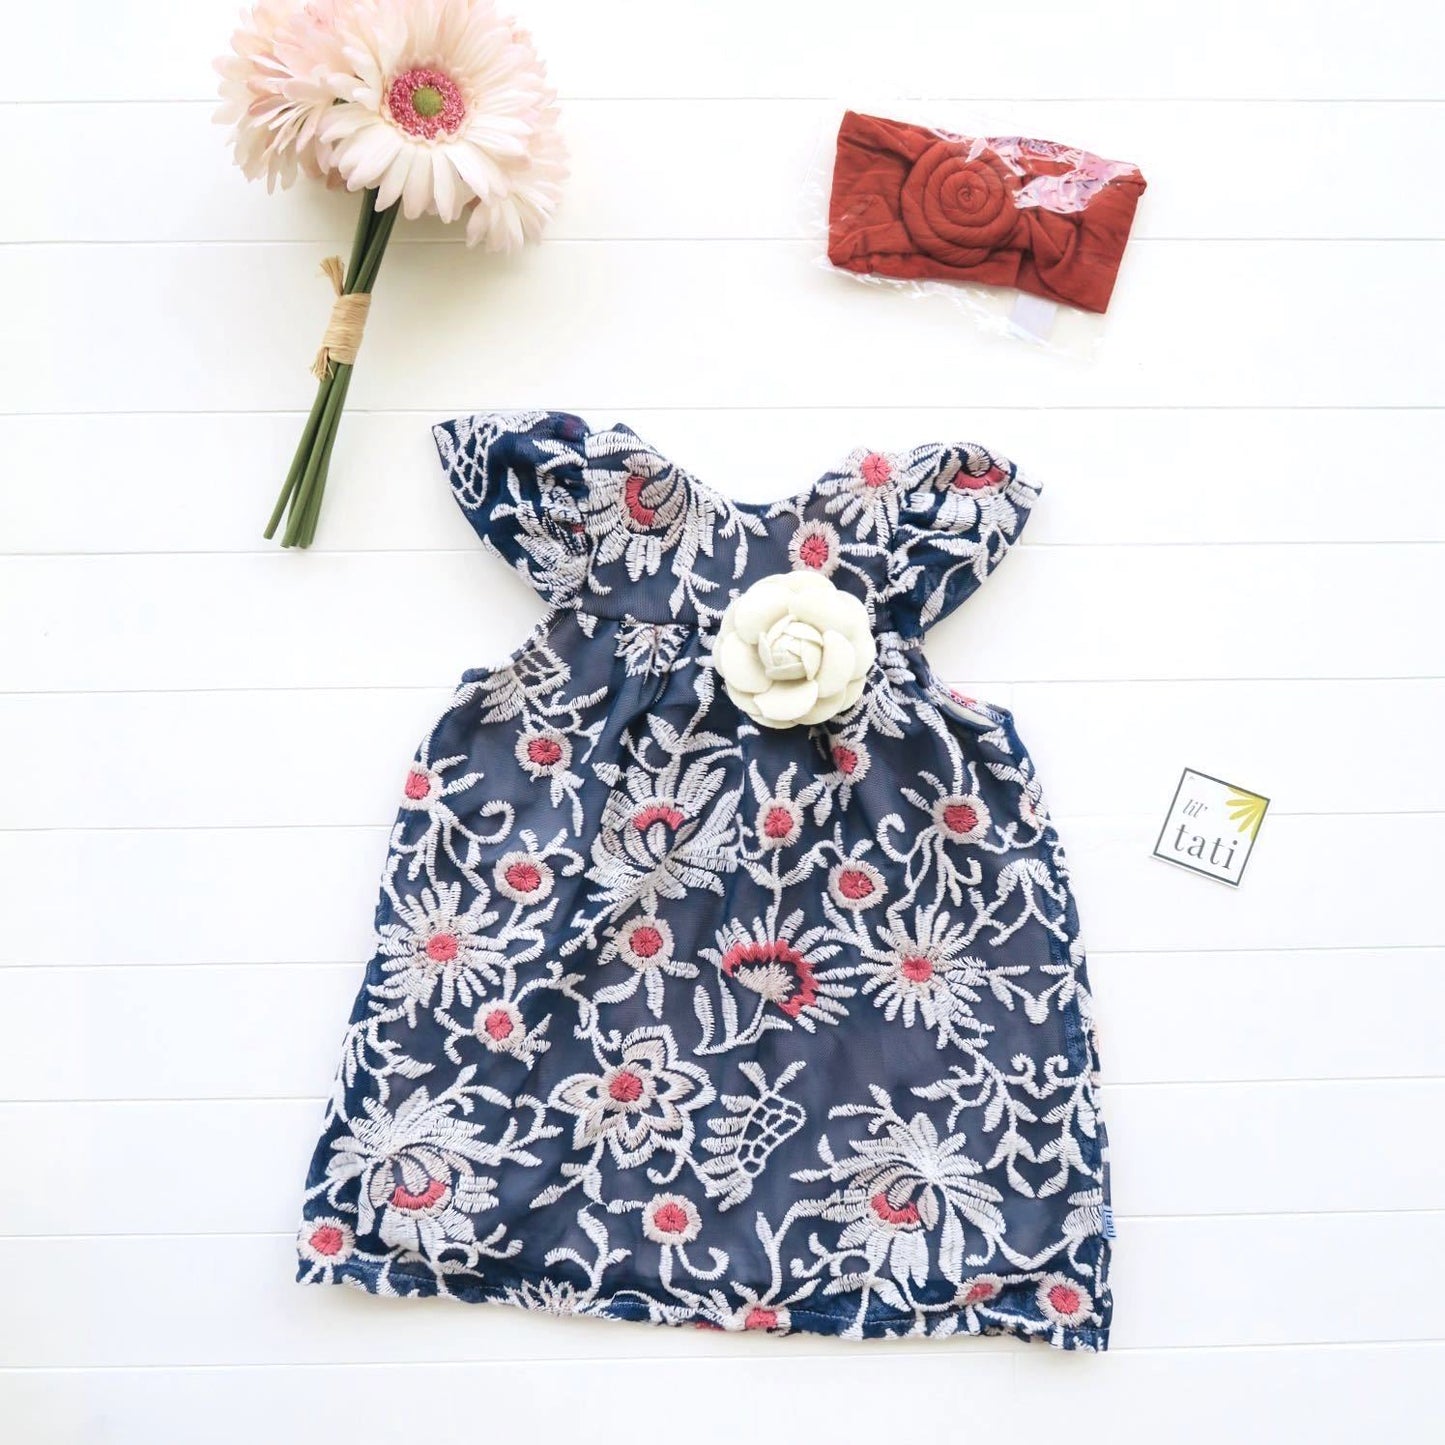 Magnolia Dress in Pink Navy Embroidery Tulle - Lil' Tati